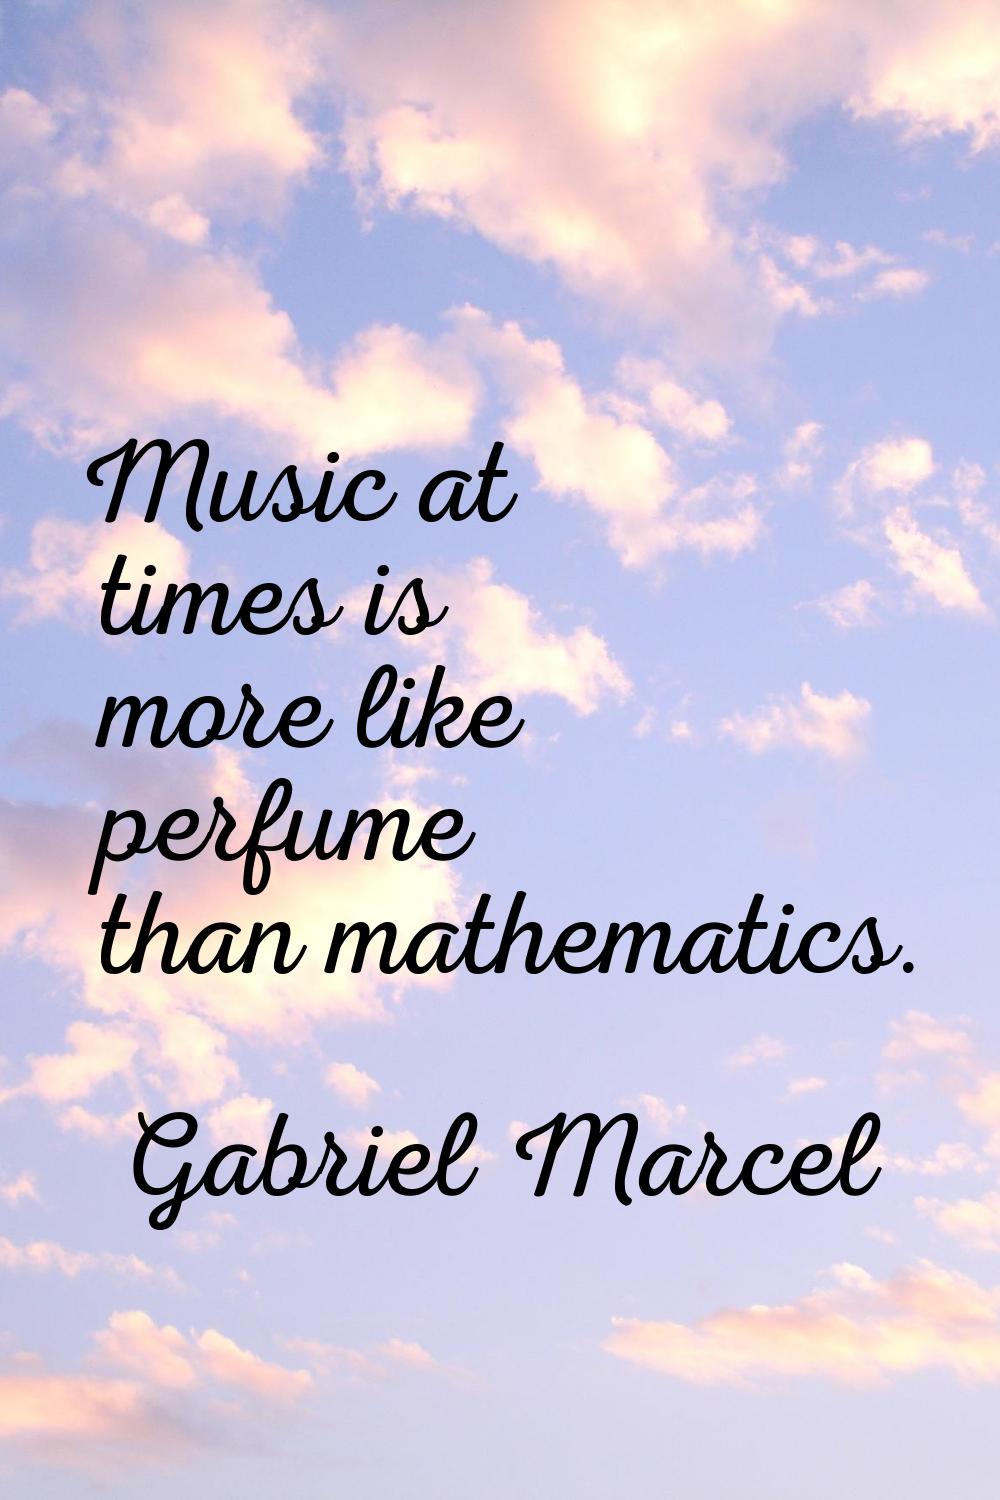 Music at times is more like perfume than mathematics.